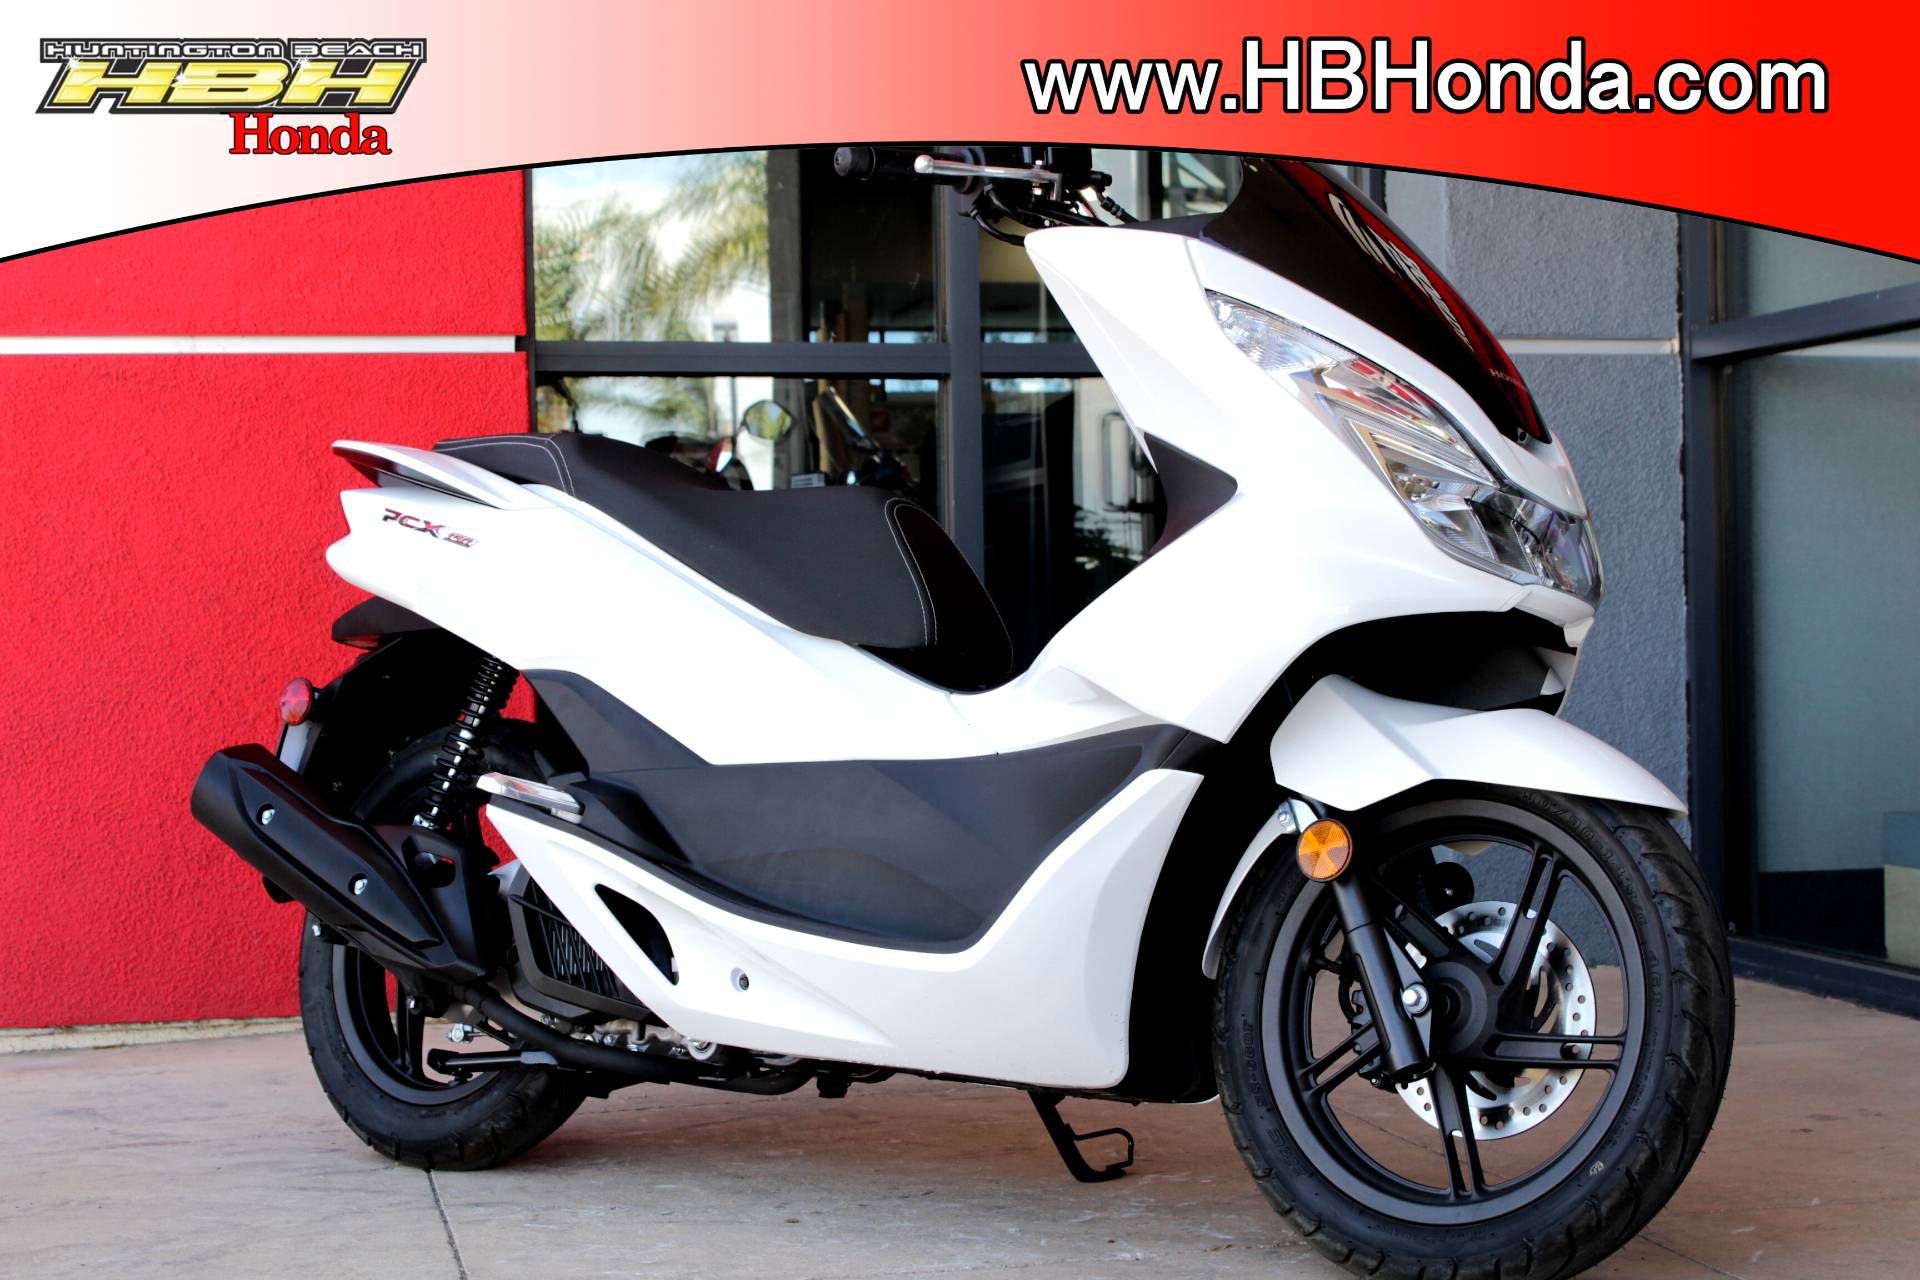 New 2018 Honda PCX150 Scooters For Sale In Huntington Beach CA